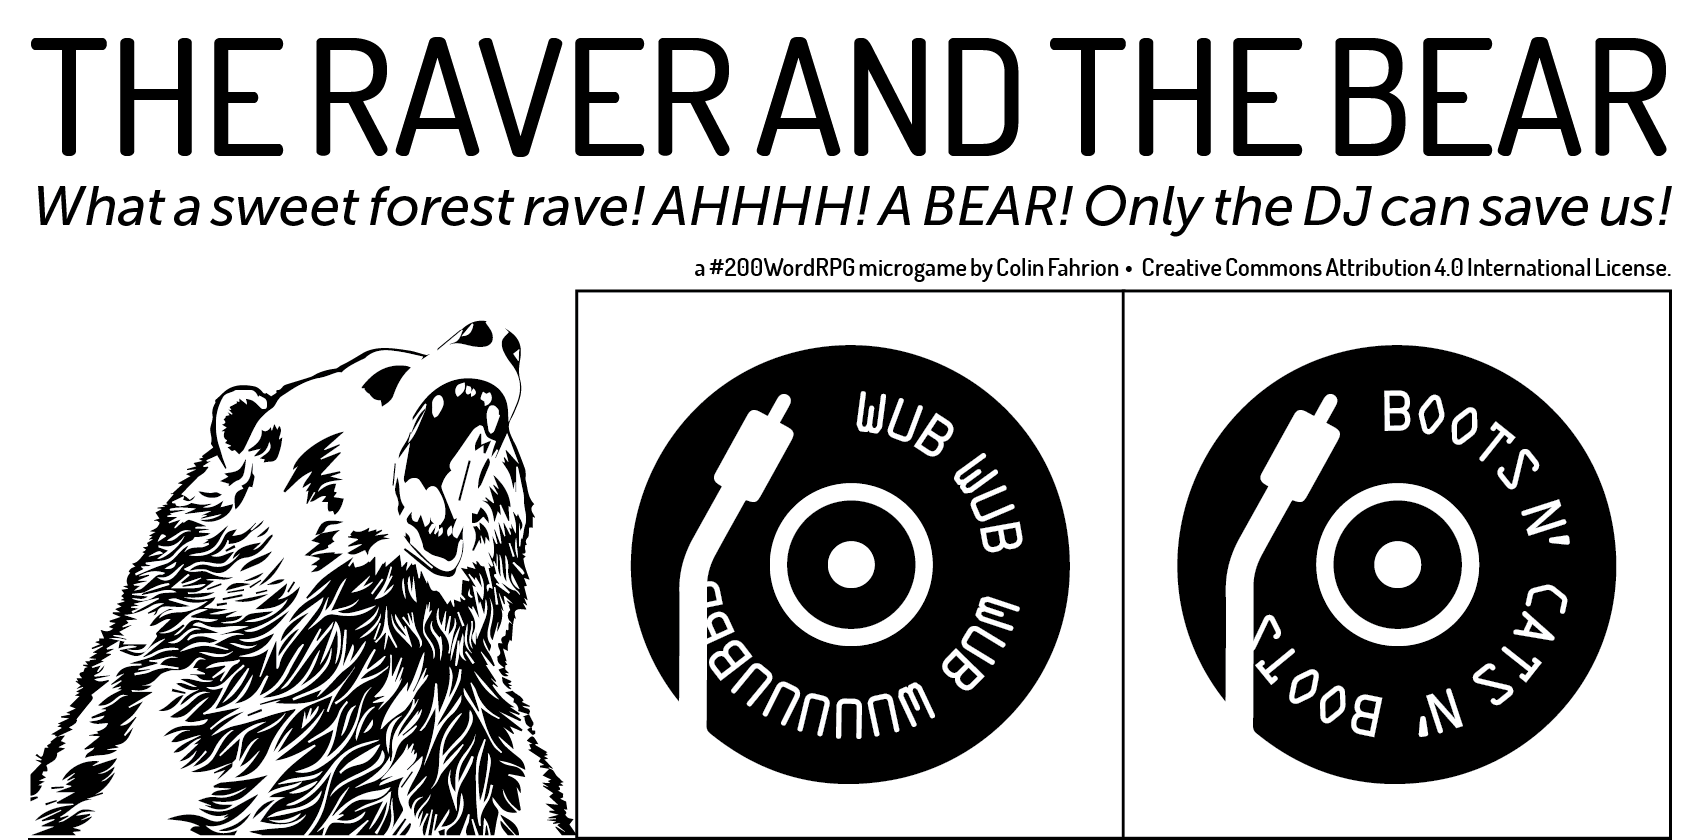 THE RAVER AND THE BEAR